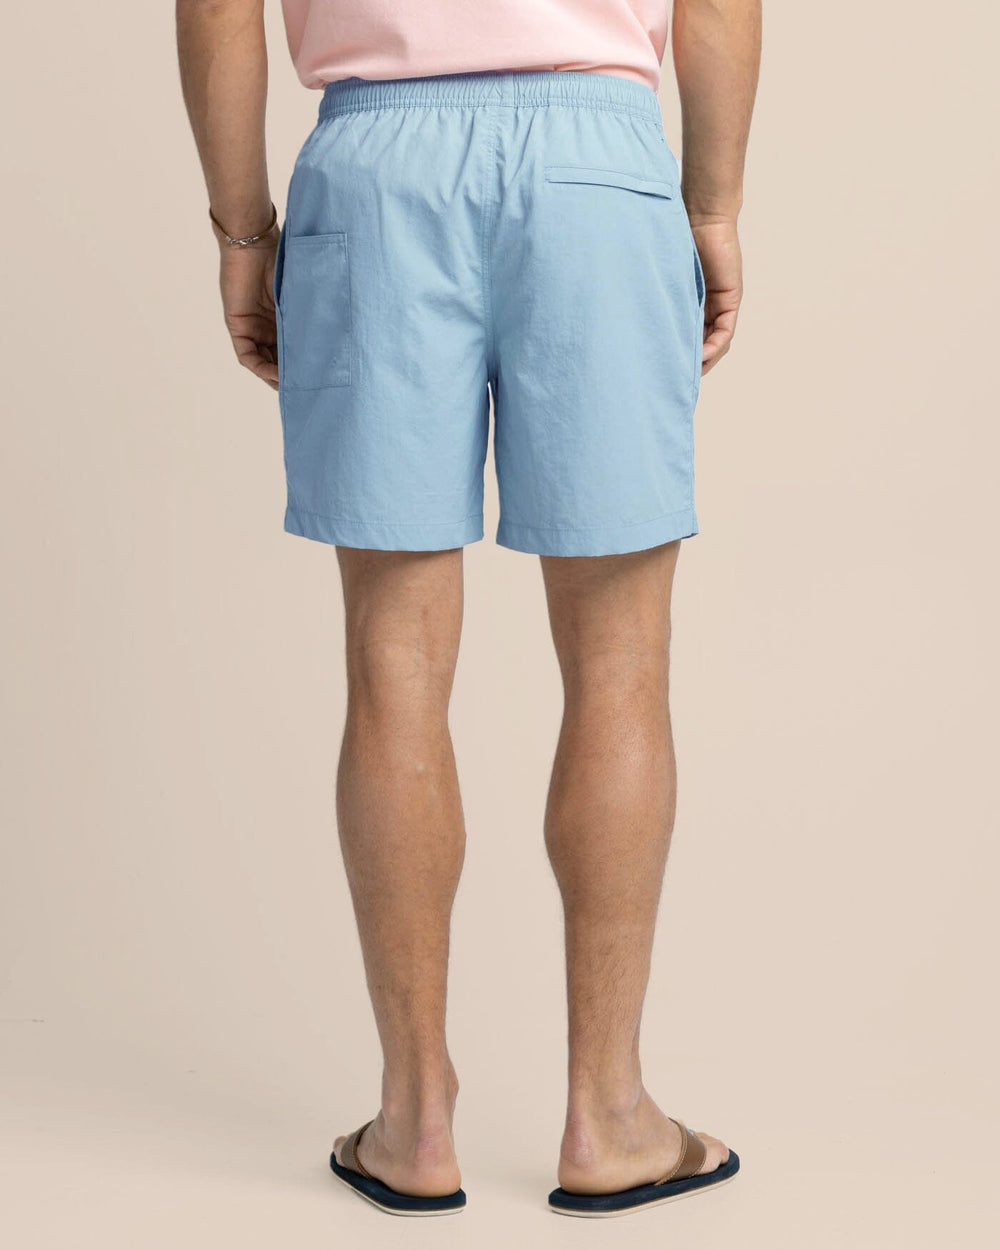 The back view of the Southern Tide Shoreline 6 Nylon Short by Southern Tide - Windward Blue